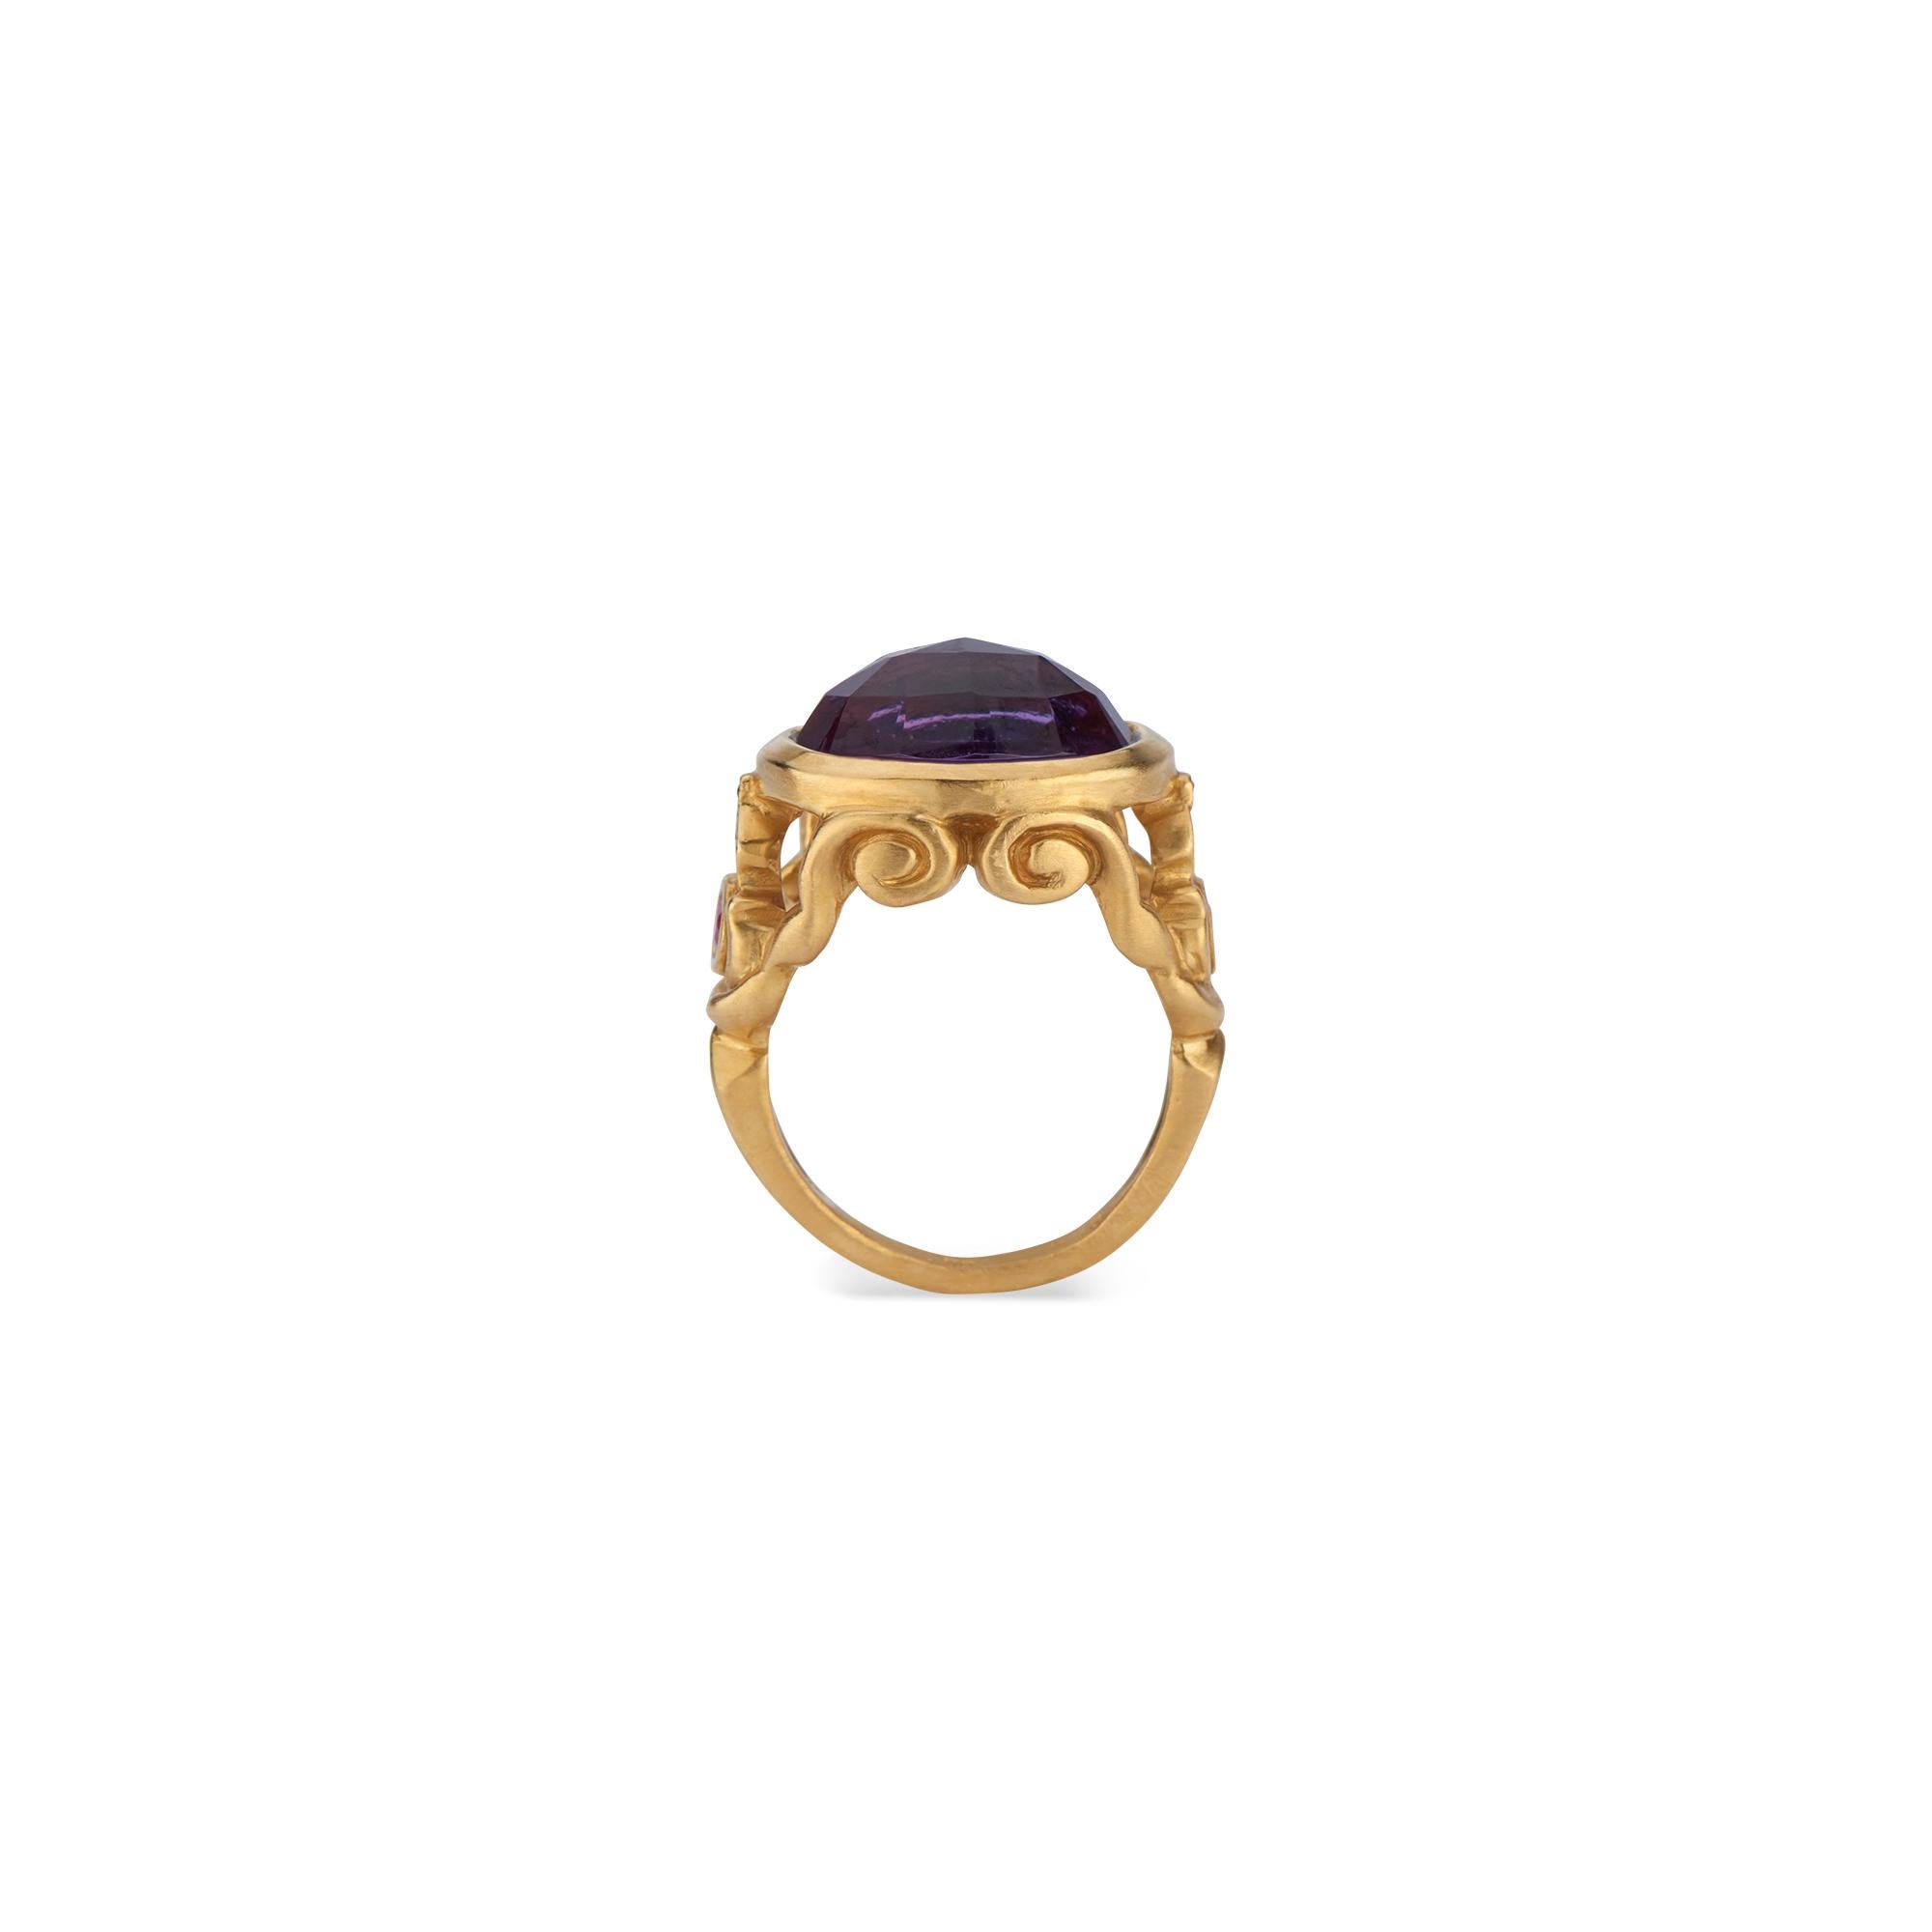 This exclusive Forge and Foundry design, features a large (.47 x .6 inches, 12 x 15 millimeter) oval rose-cut amethyst in 22k gold, accented with fuchsia sapphires (approximately .0833 total carat weight). The 22k gold with a matte finish provides a